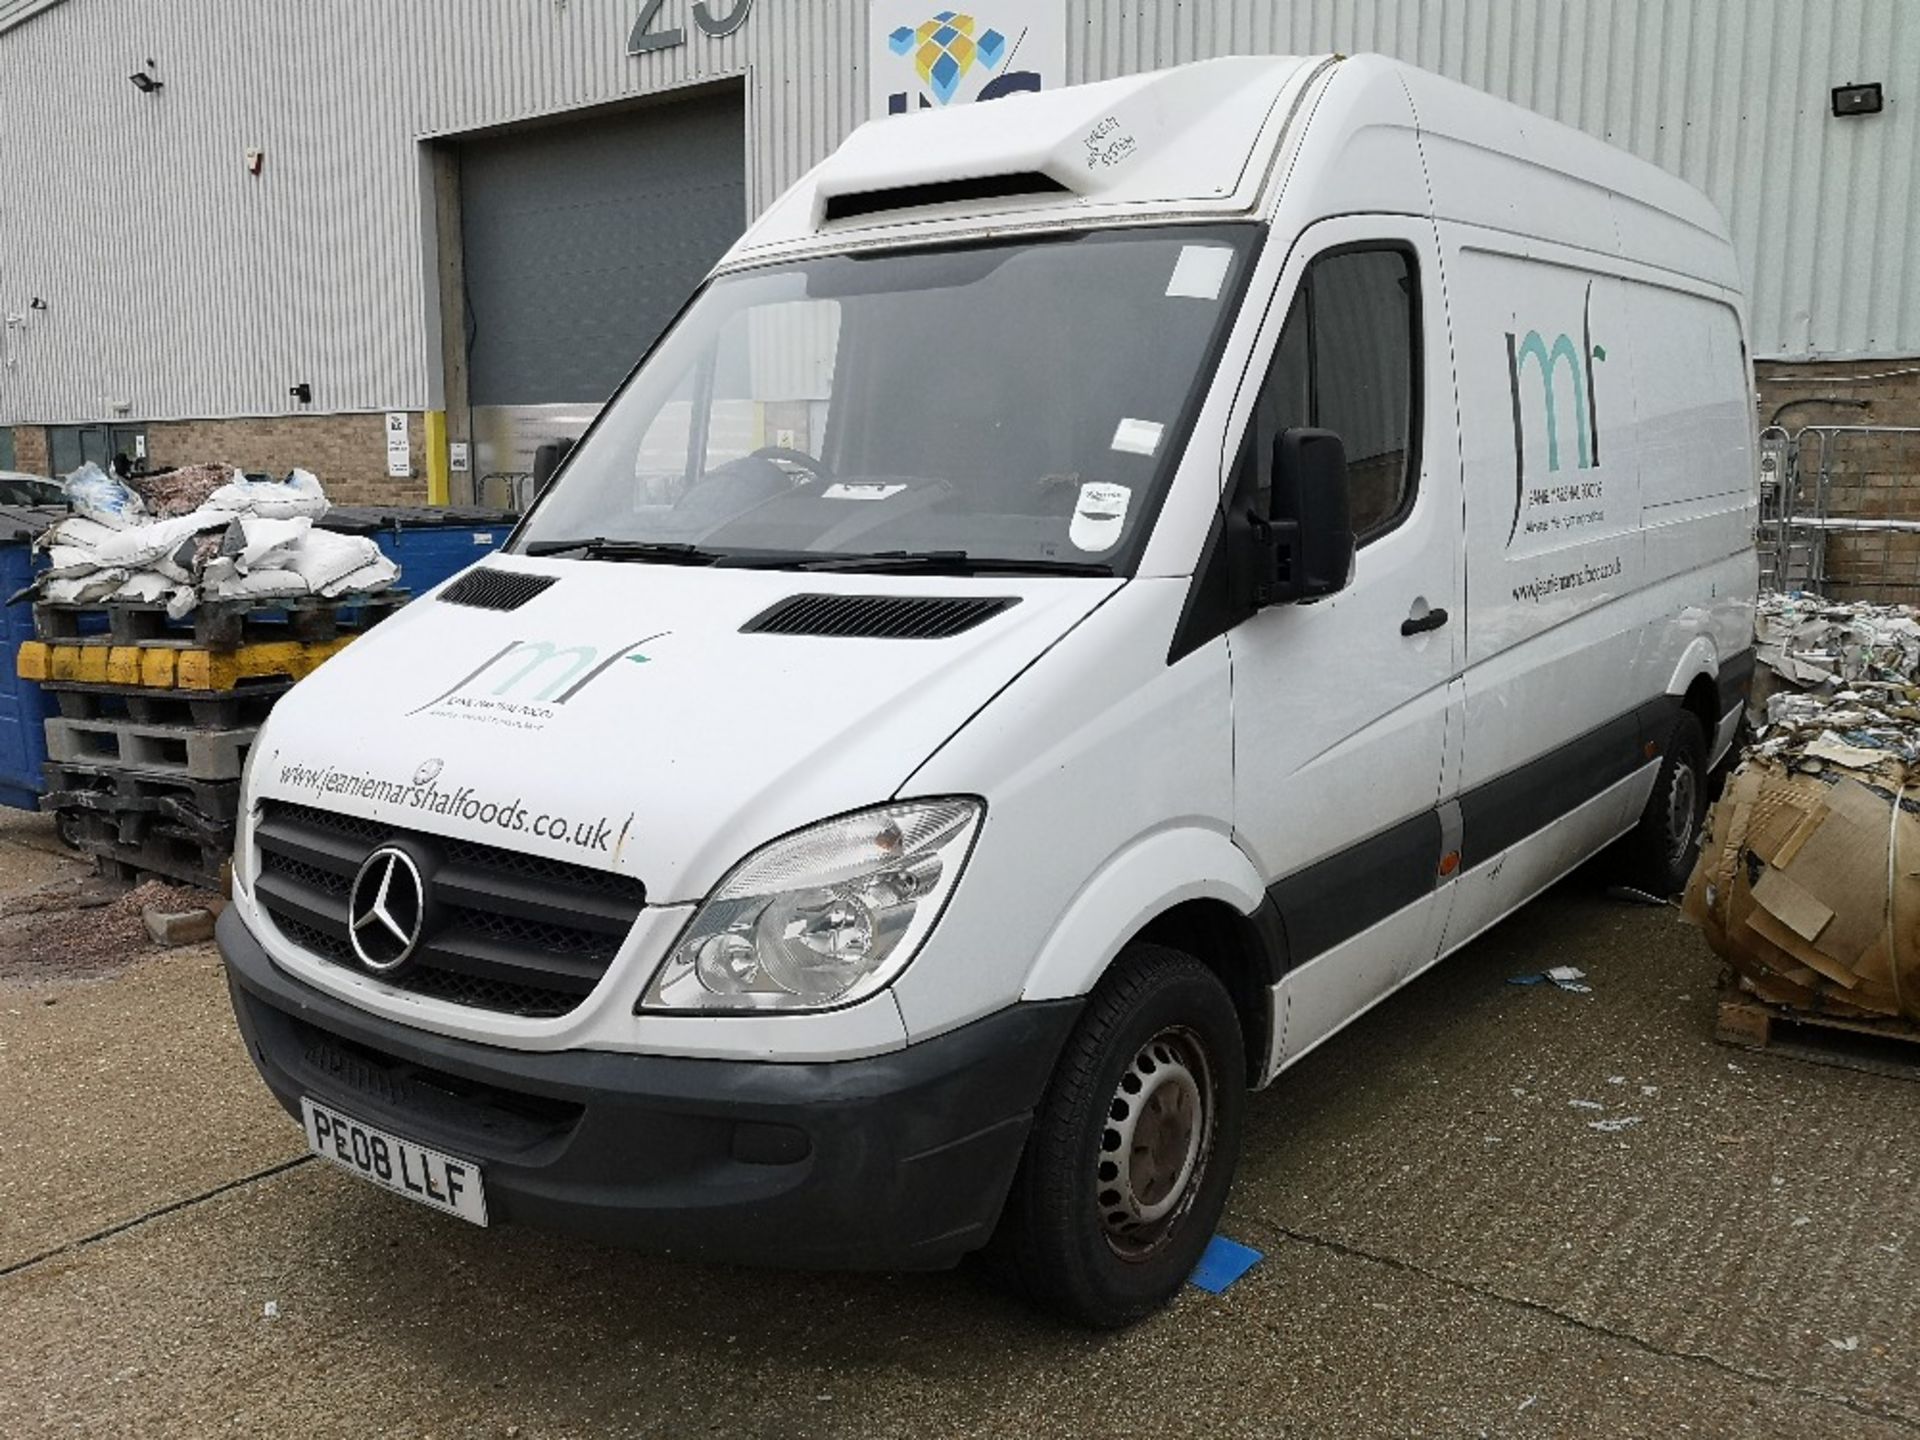 Mercedes Sprinter 311cdi Van with Direct Air Ventilation System - Image 3 of 4